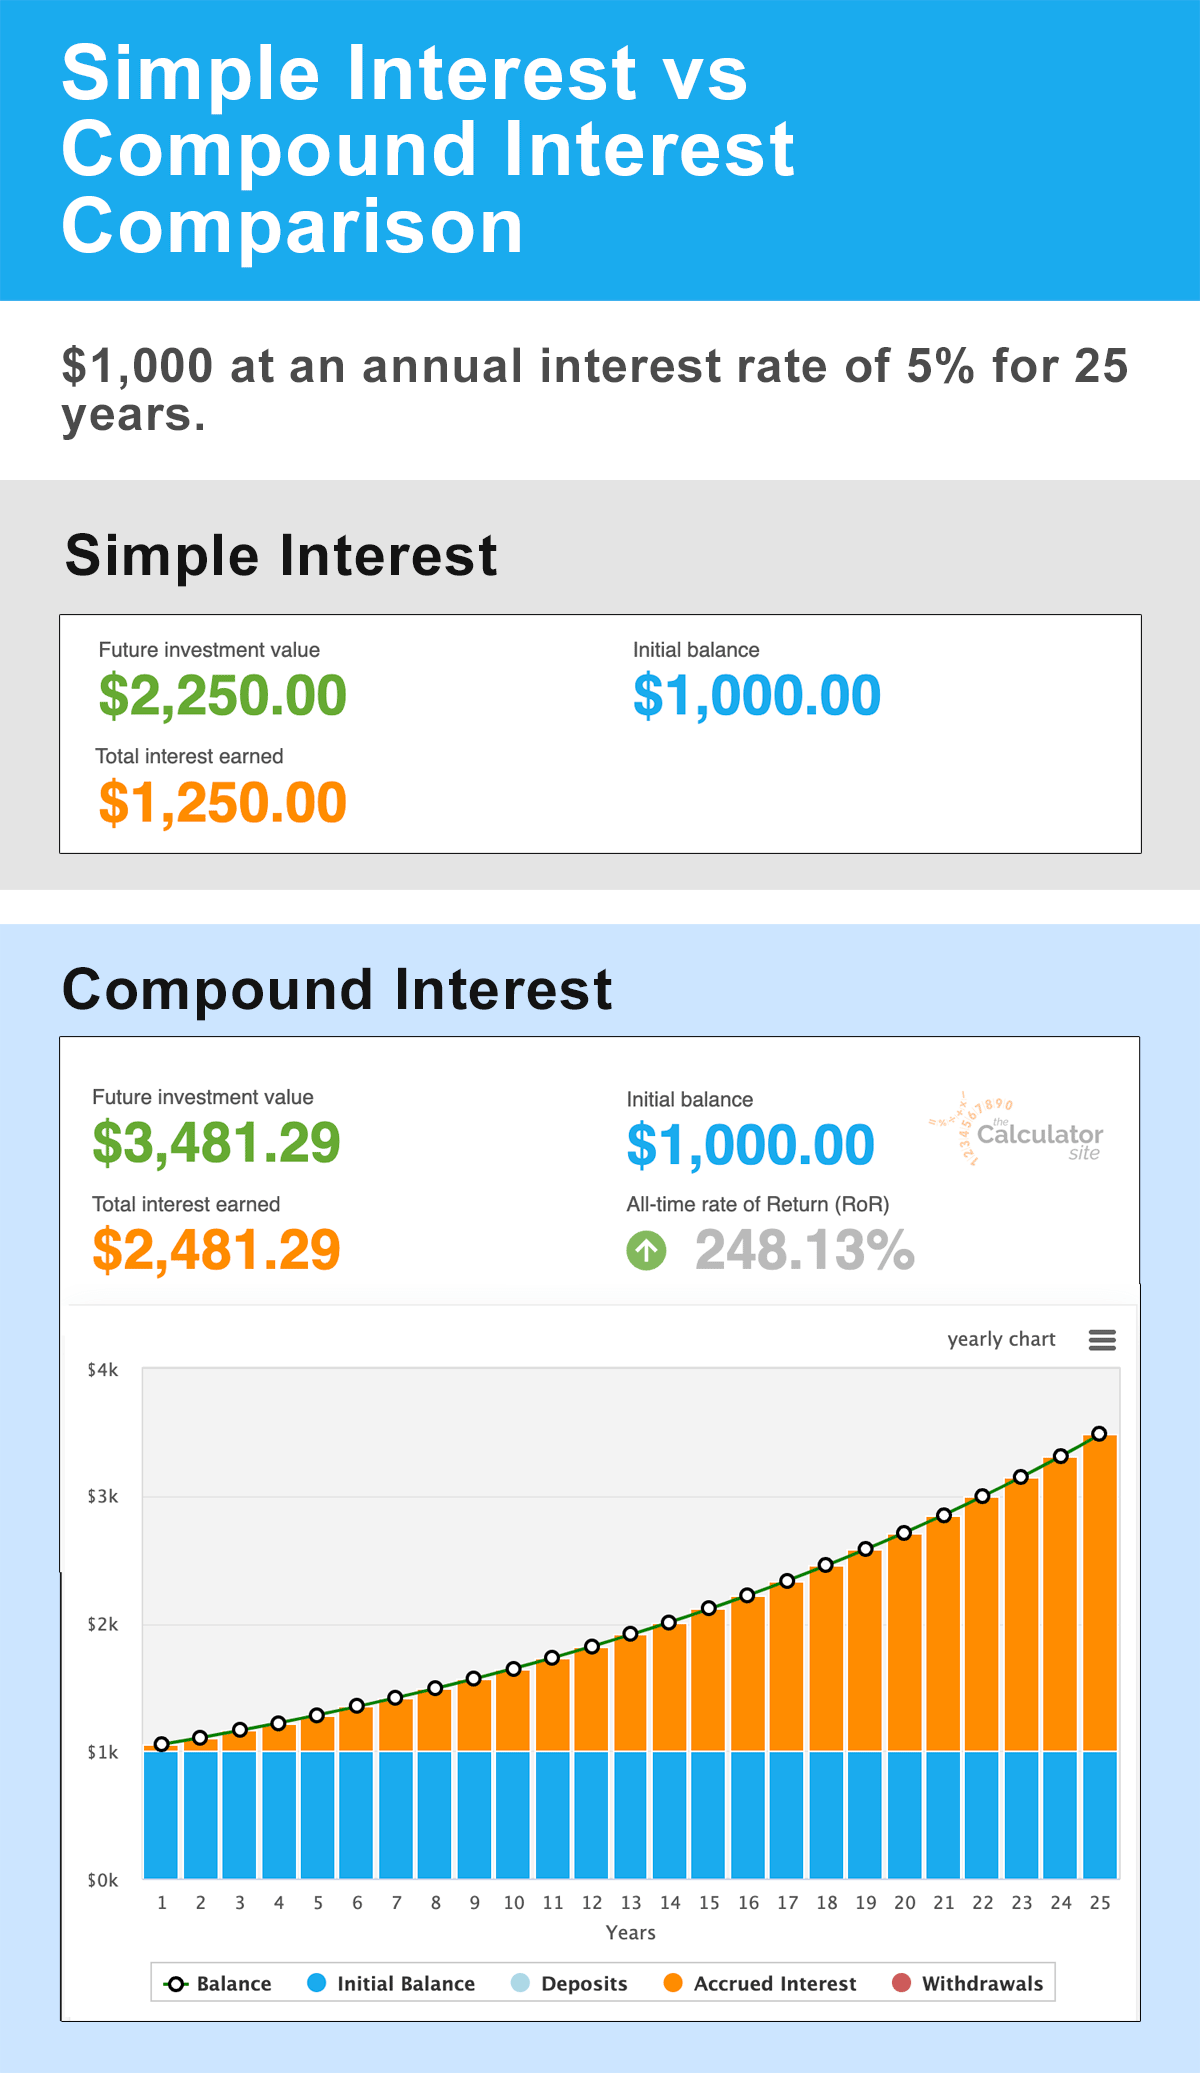 Comparison of compound interest versus simple interest for $1,000 at 5% for 25 years